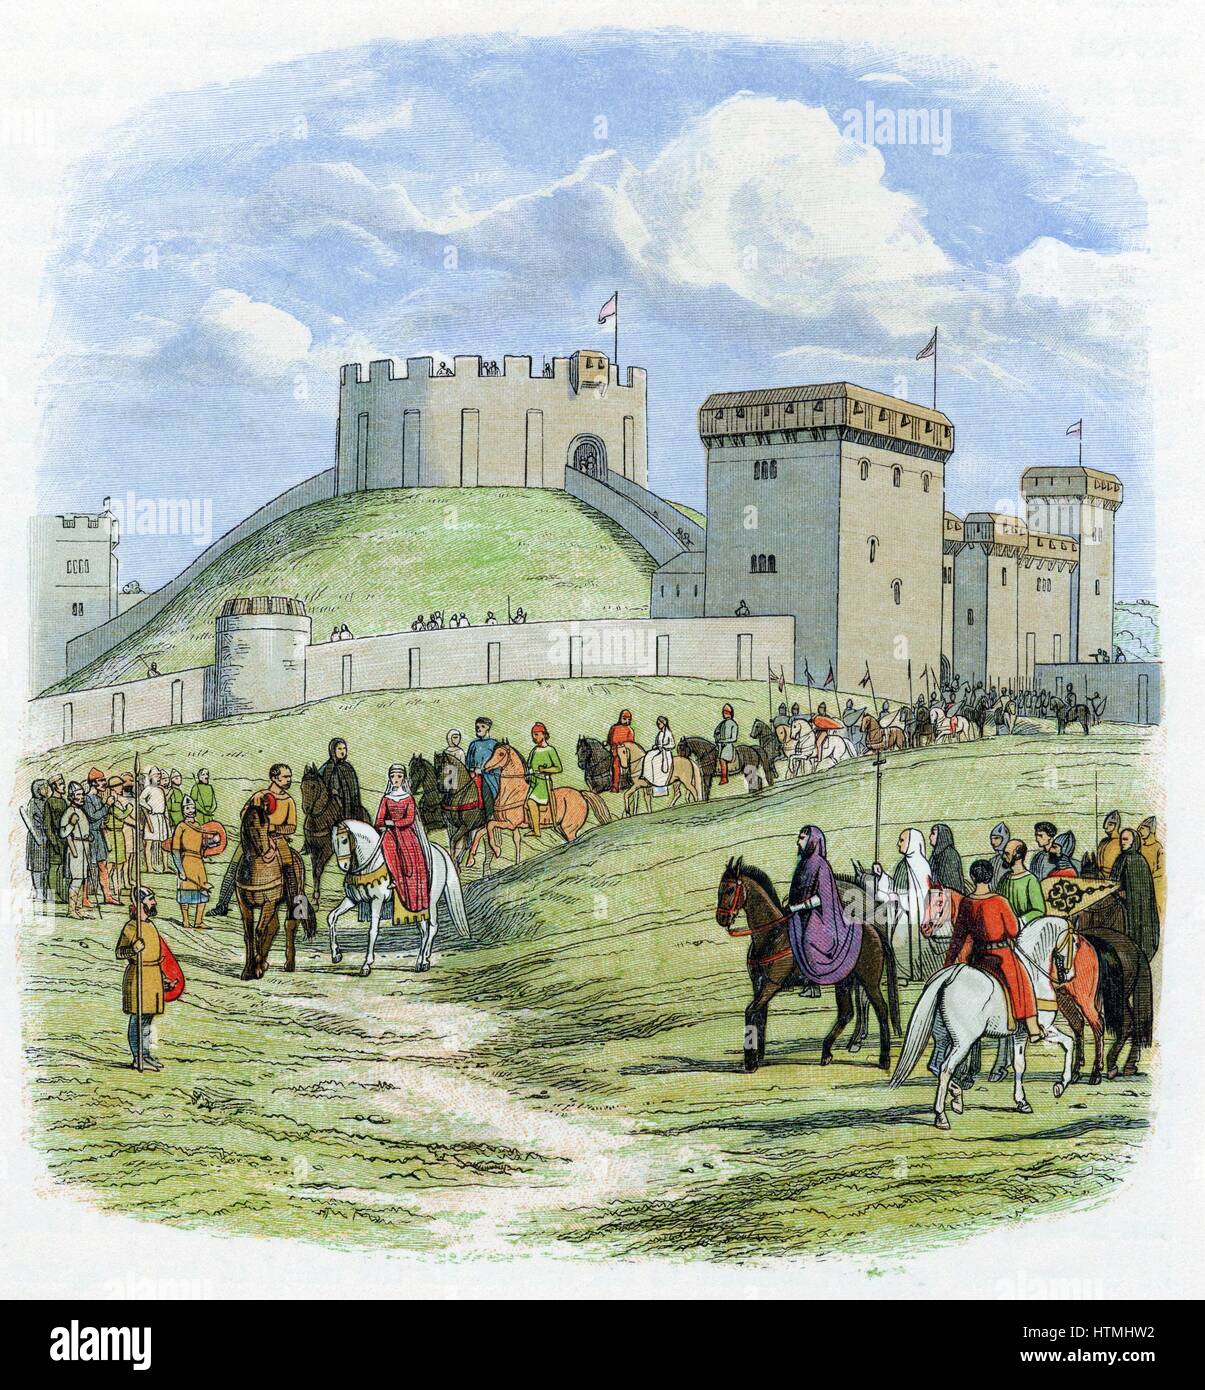 Empress Matilda (1102-1167) daughter and heiress of William I of England allowed by the King, Stephen, to leave Arundel castle for Gloucester 1139. Colour-printed wood engraving c1860 Stock Photo